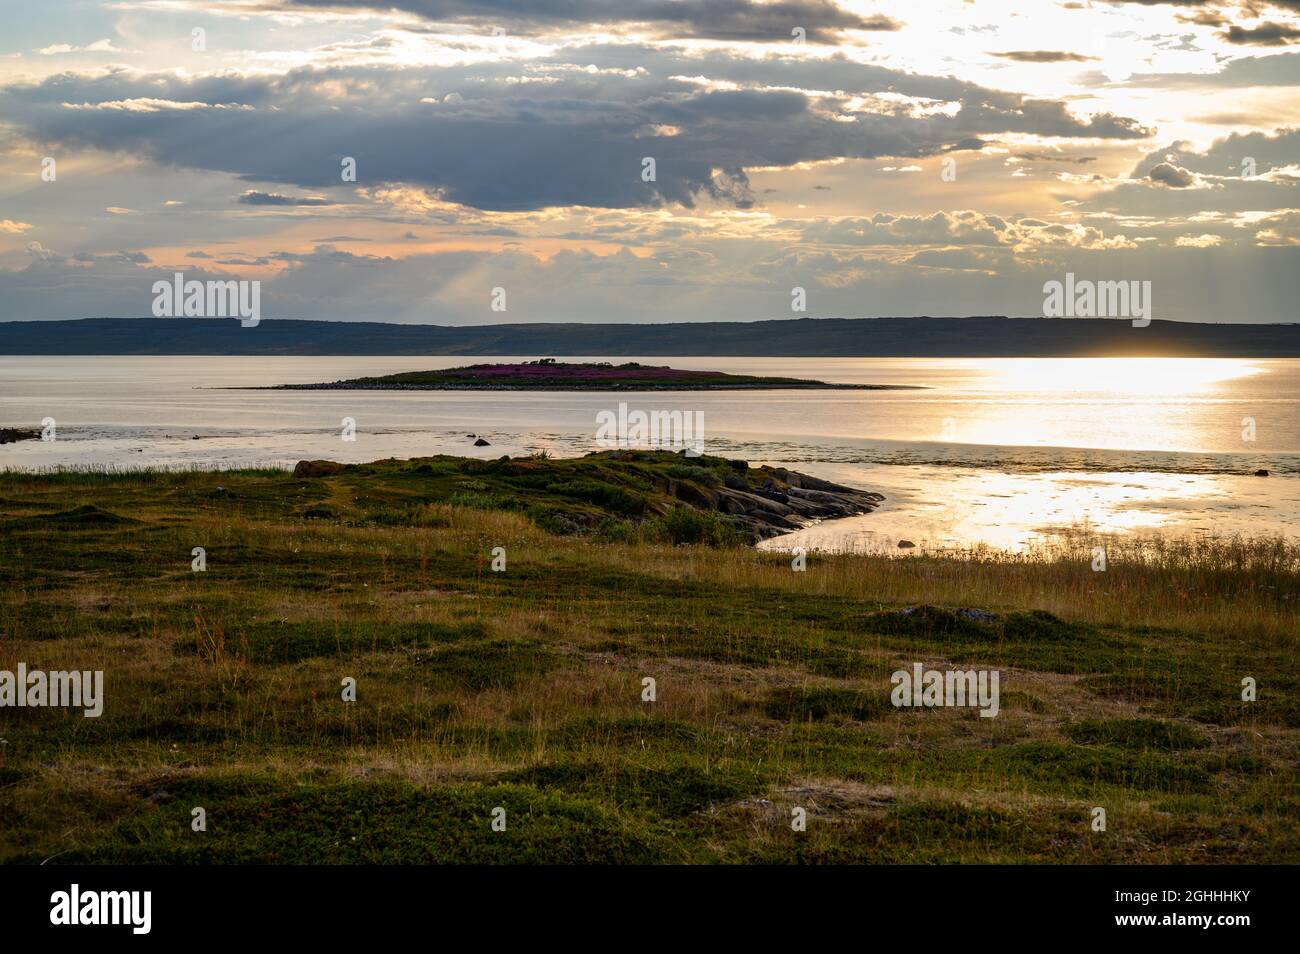 Clouds above the Varanger fjord in Nesseby, Finnmark, Norway. Stock Photo